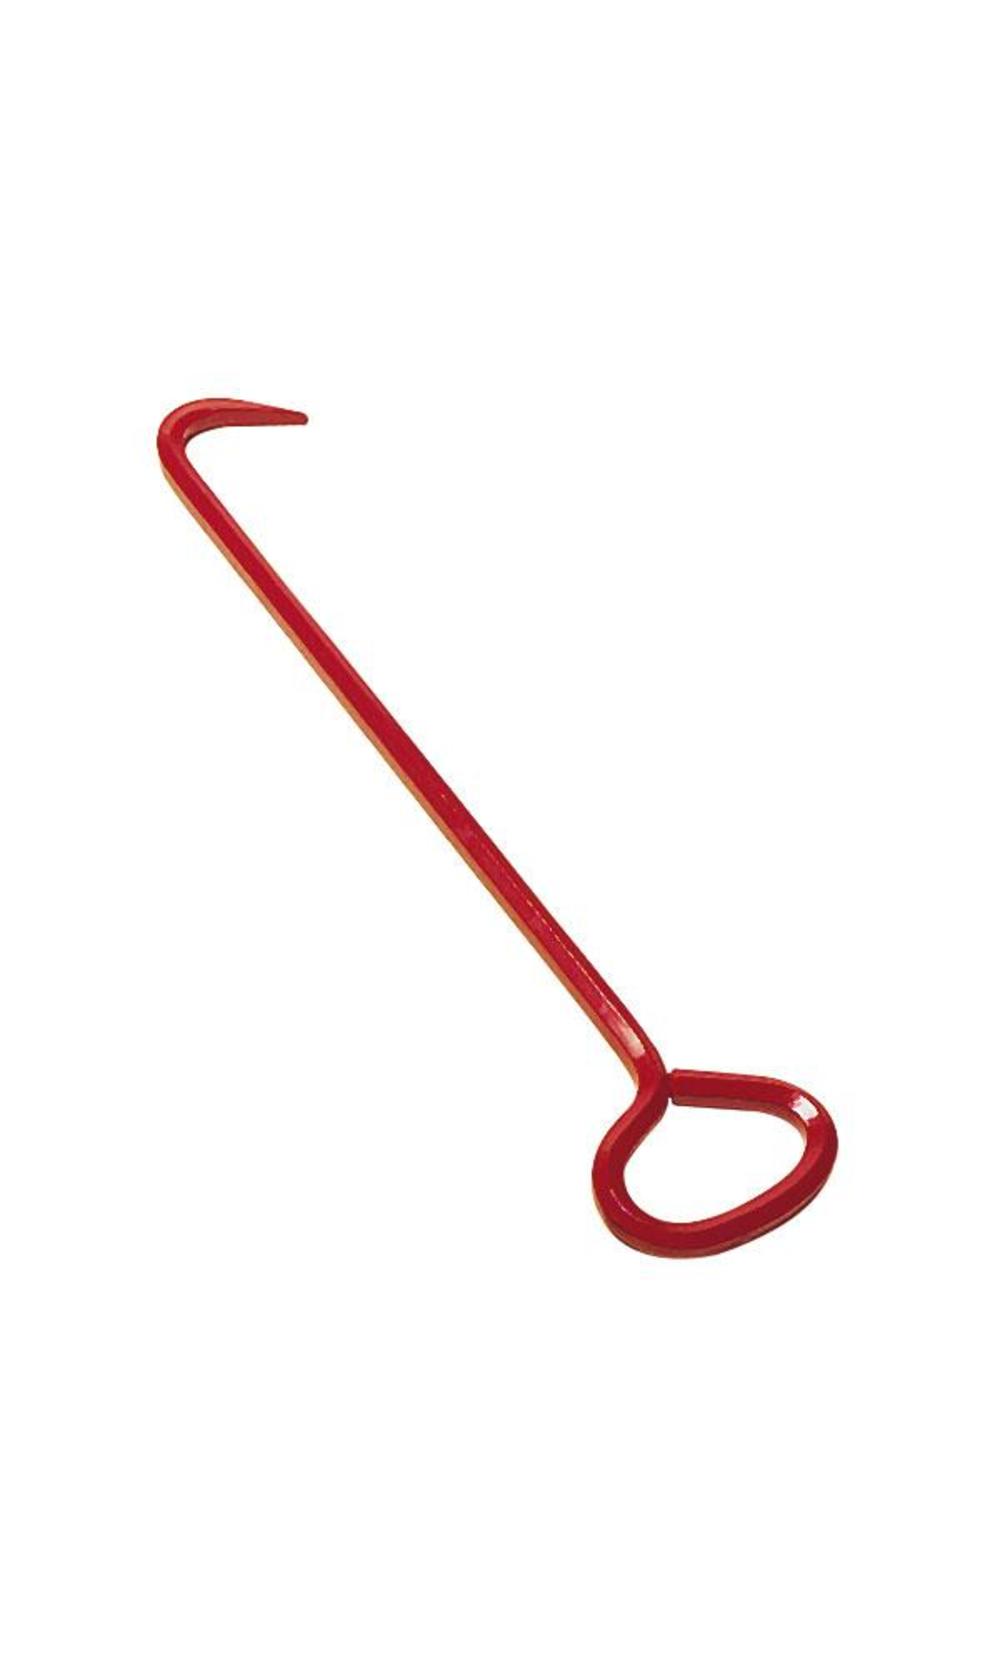 Reed MH30 30in Manhole Cover Hook